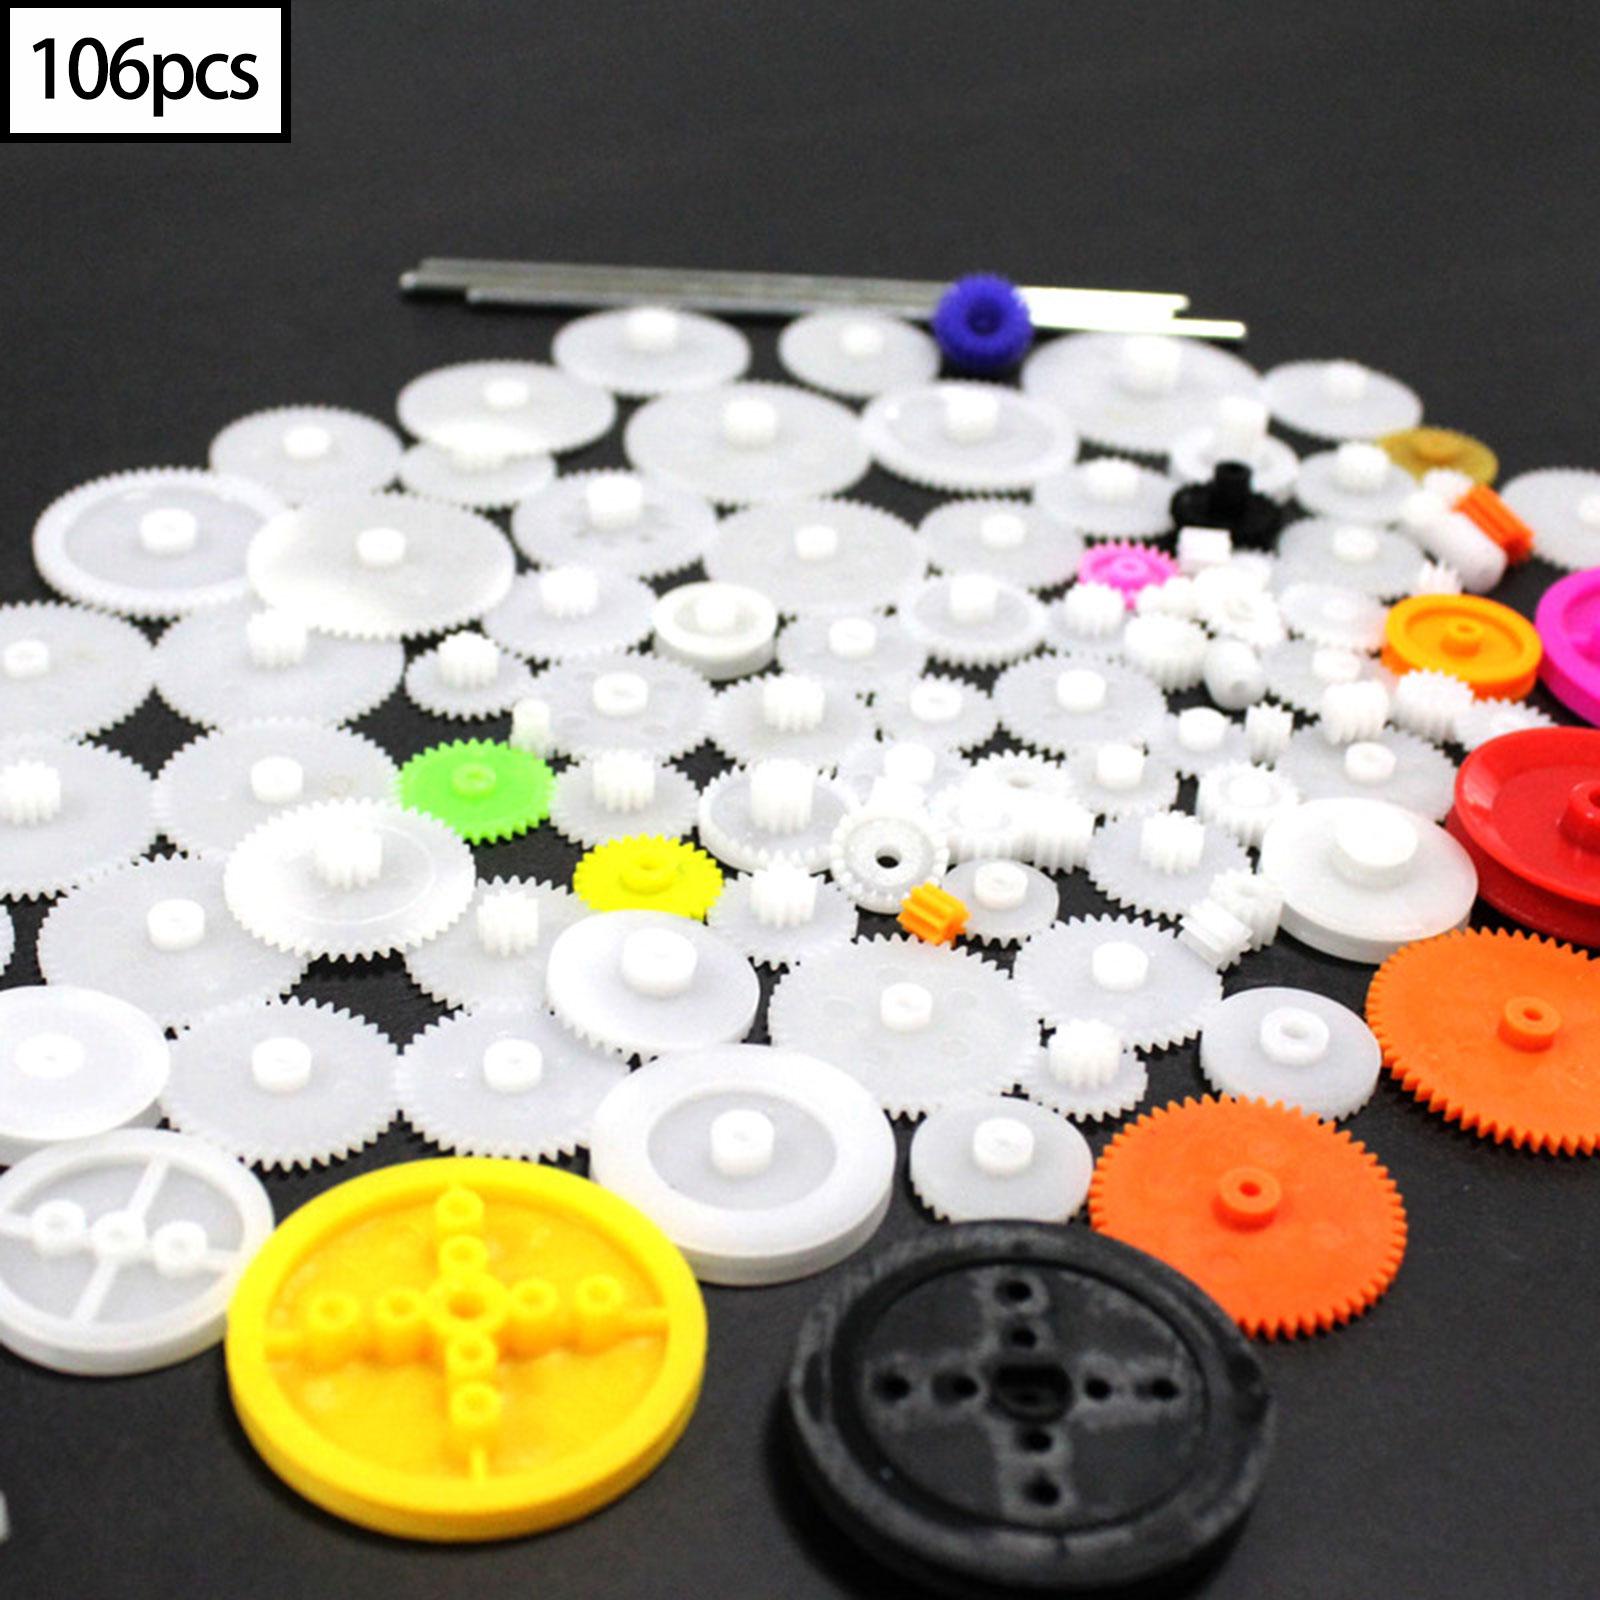 106x Gear Package Kit Accessories Rubber Band Assortment for Education Toys